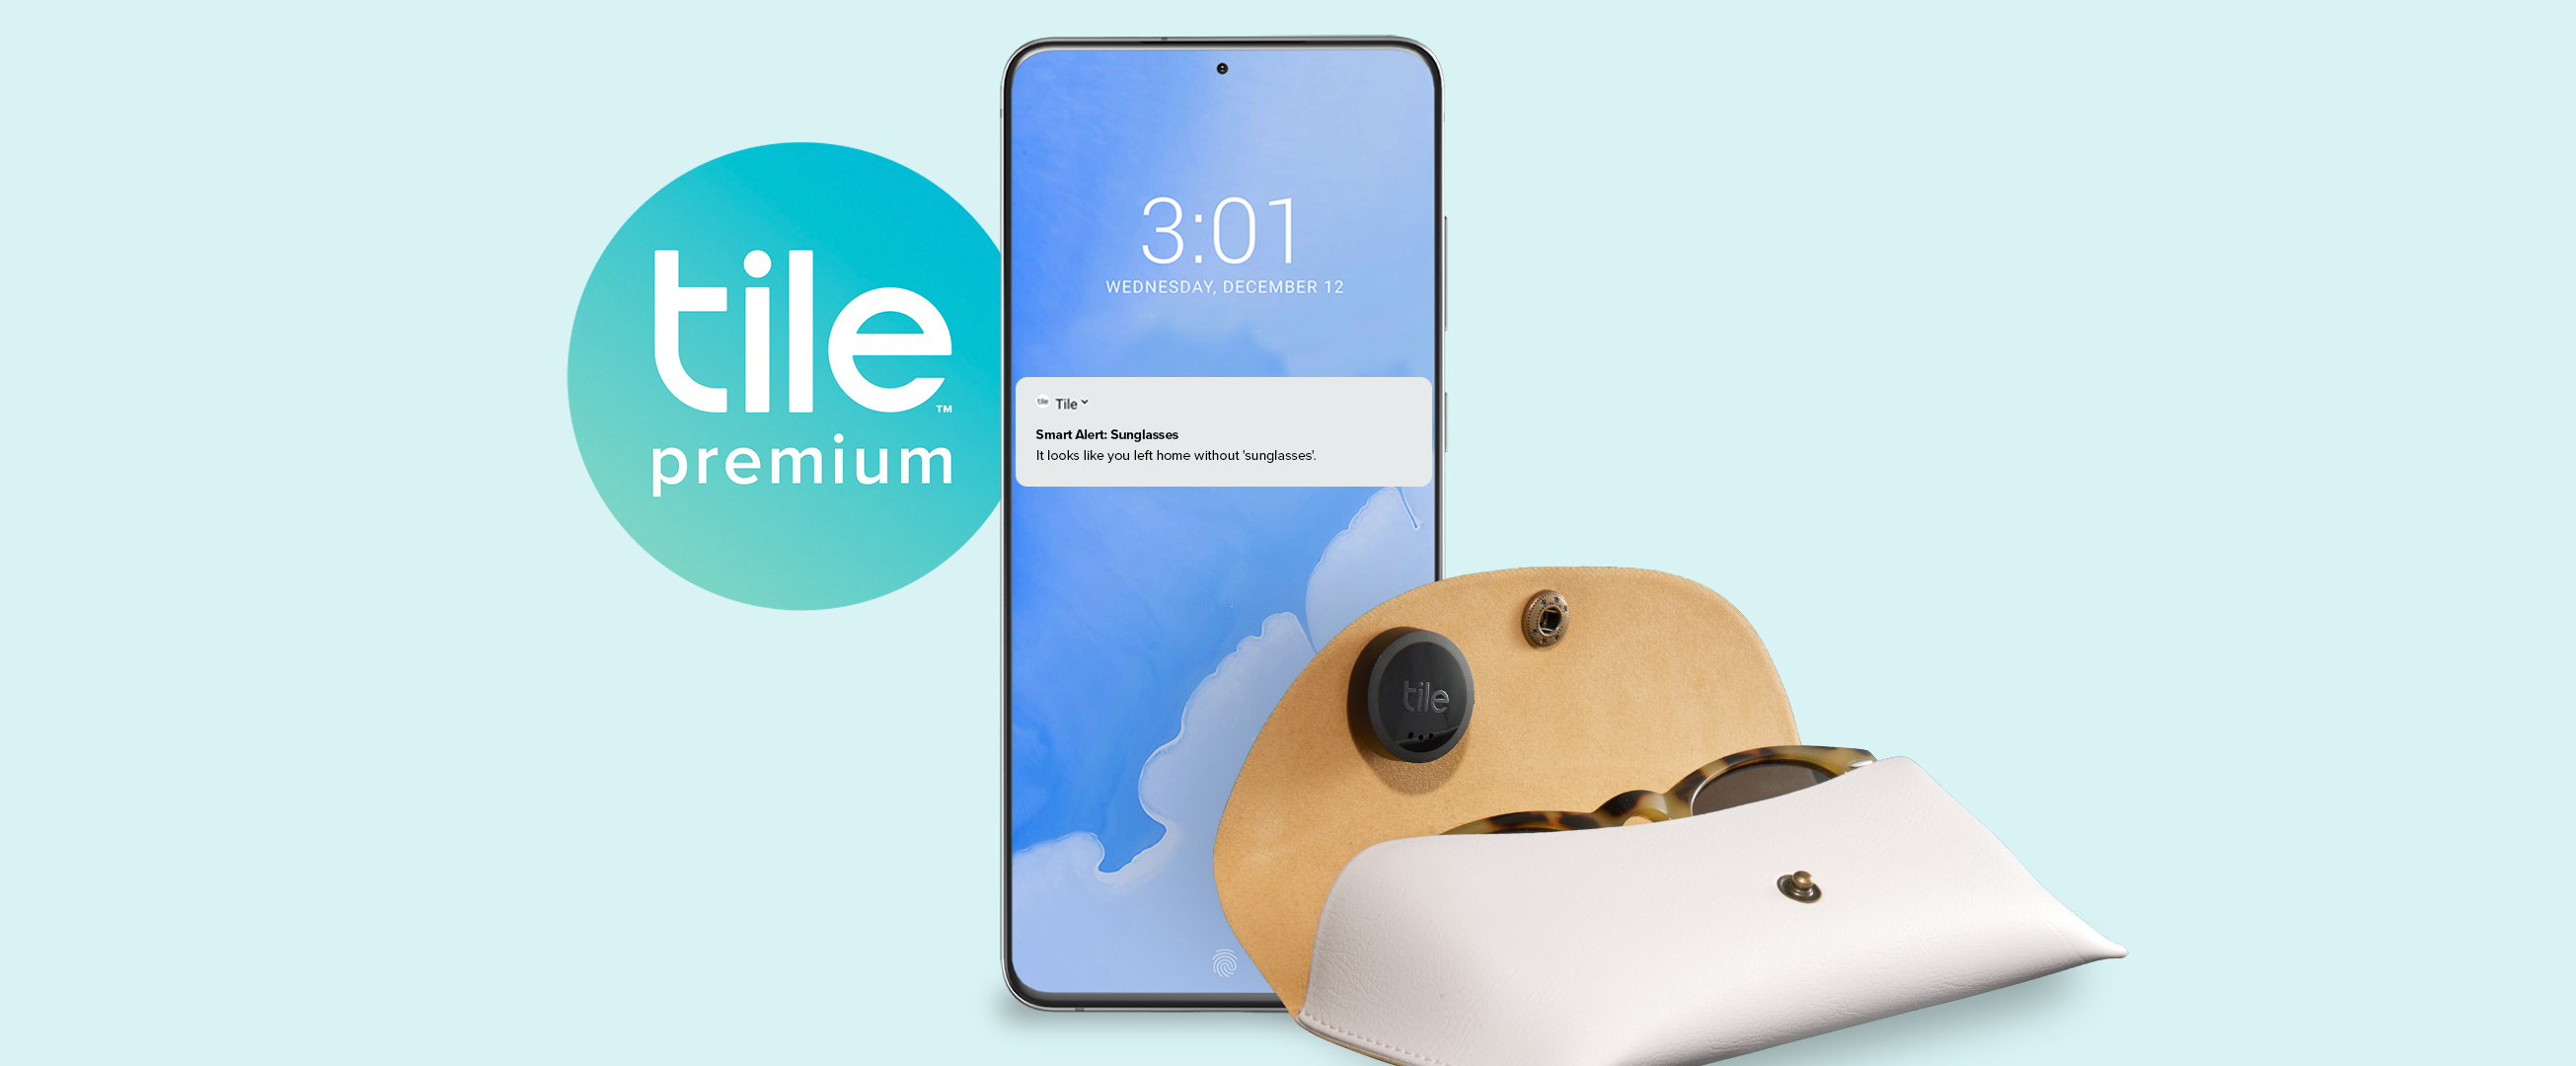 New and Now With Tile Premium - We'll reimburse you up to $100!